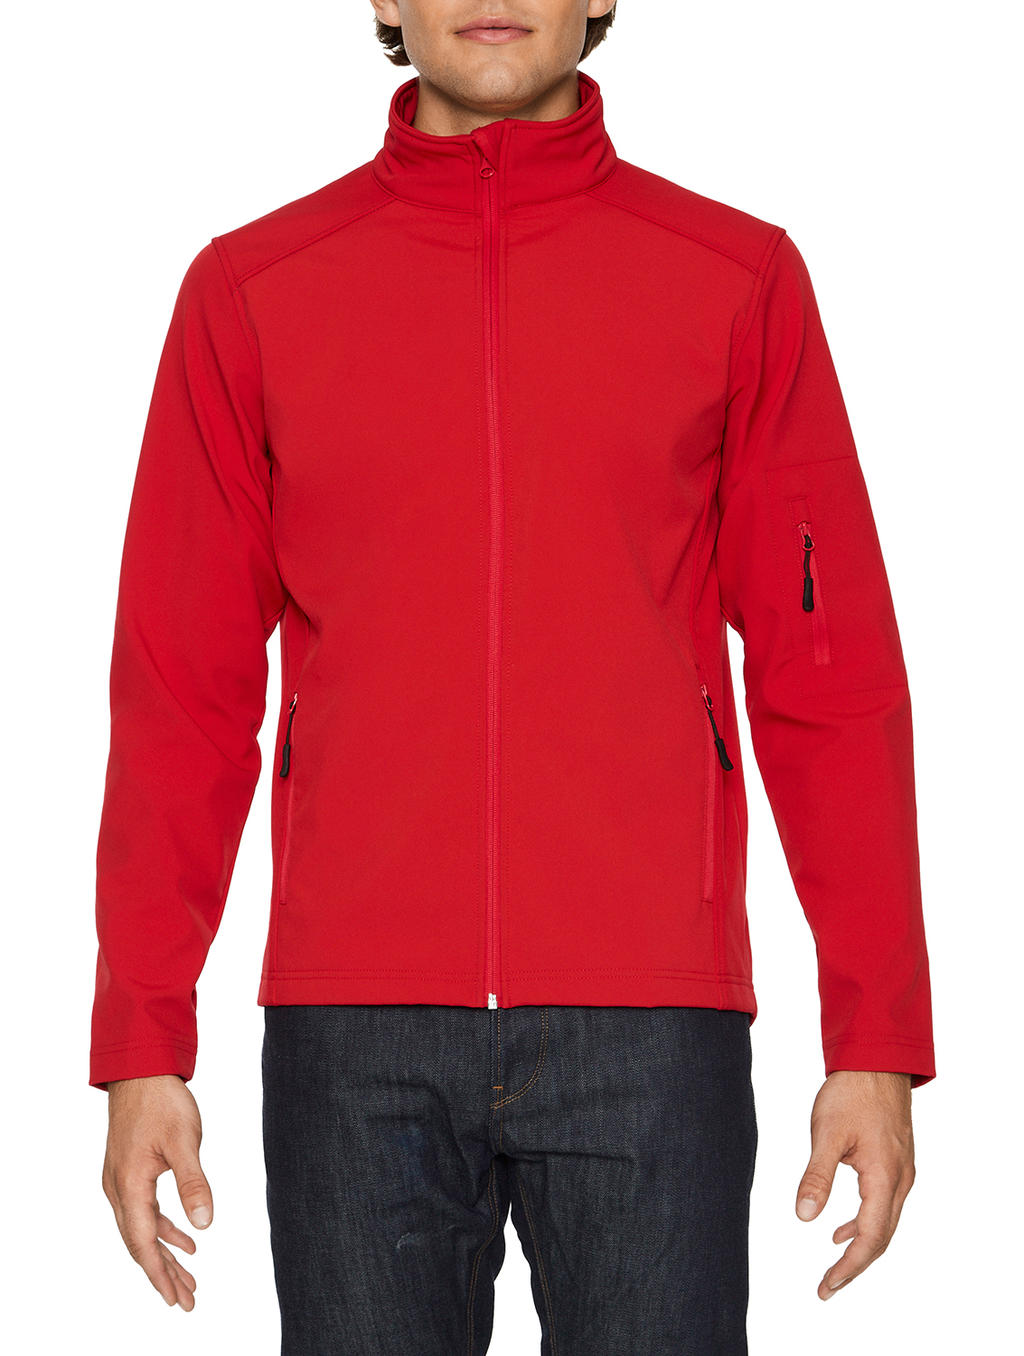  Hammer? Unisex Softshell Jacket in Farbe Red